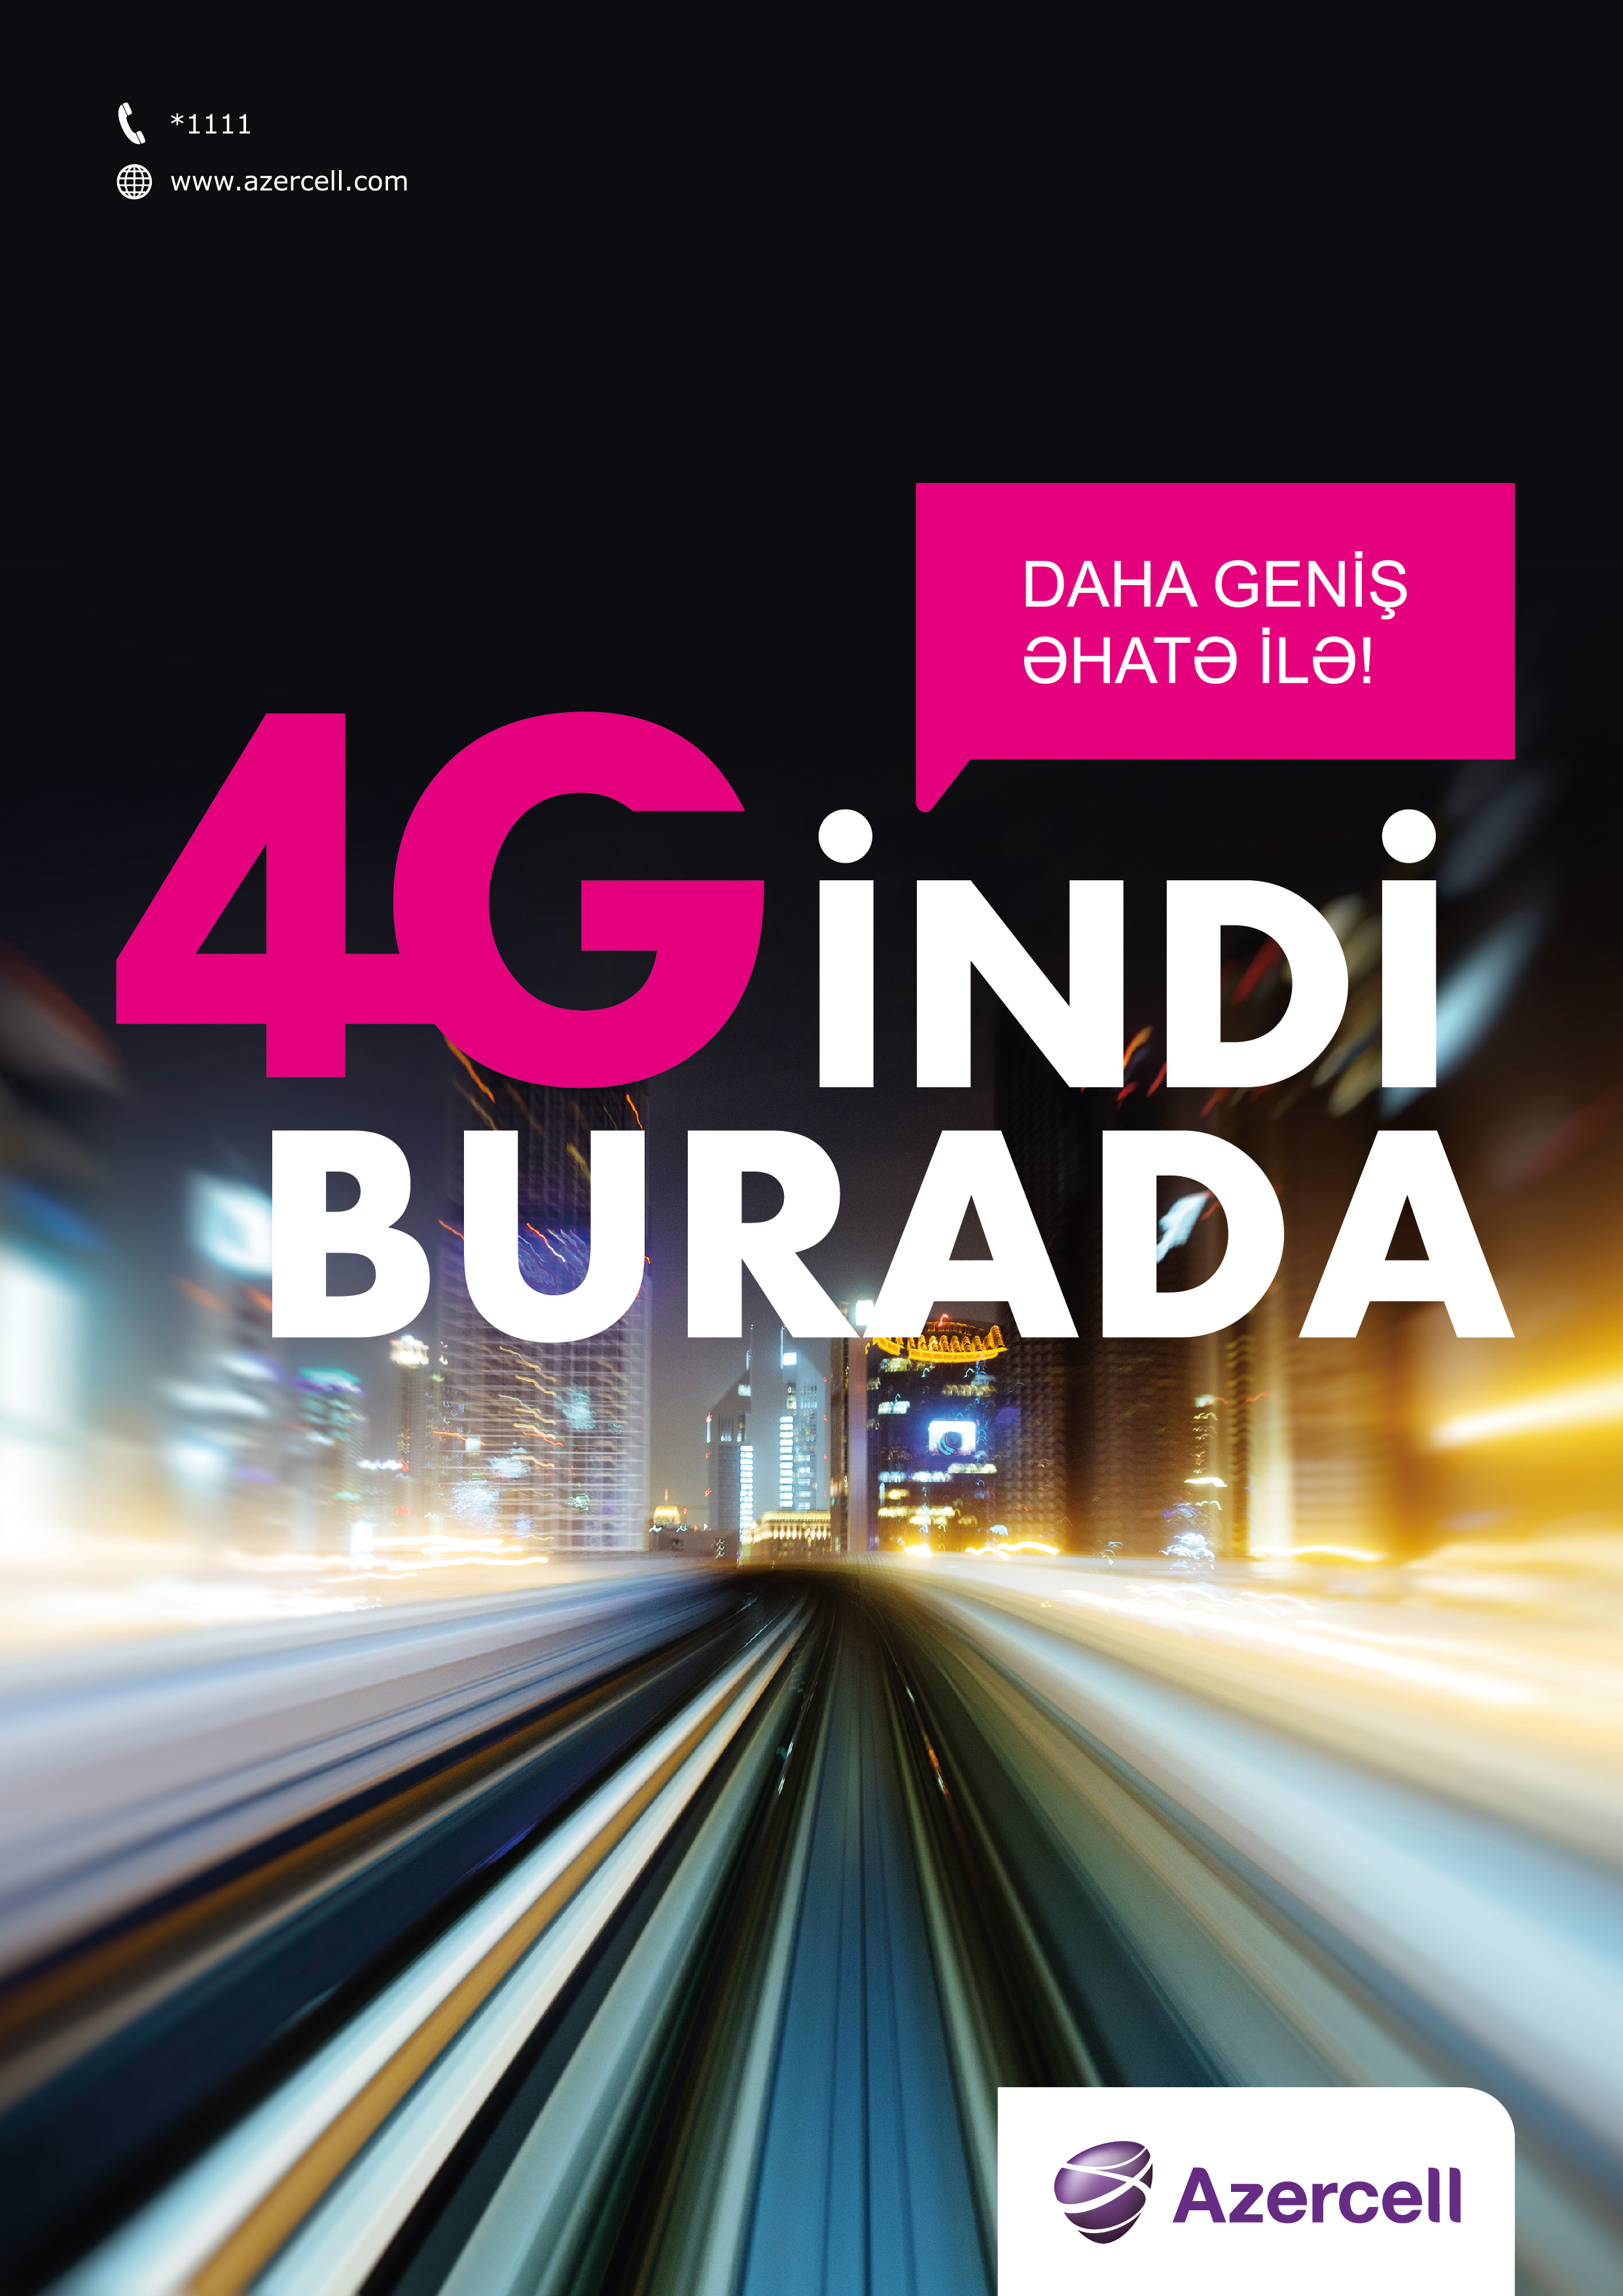 4G is now here!